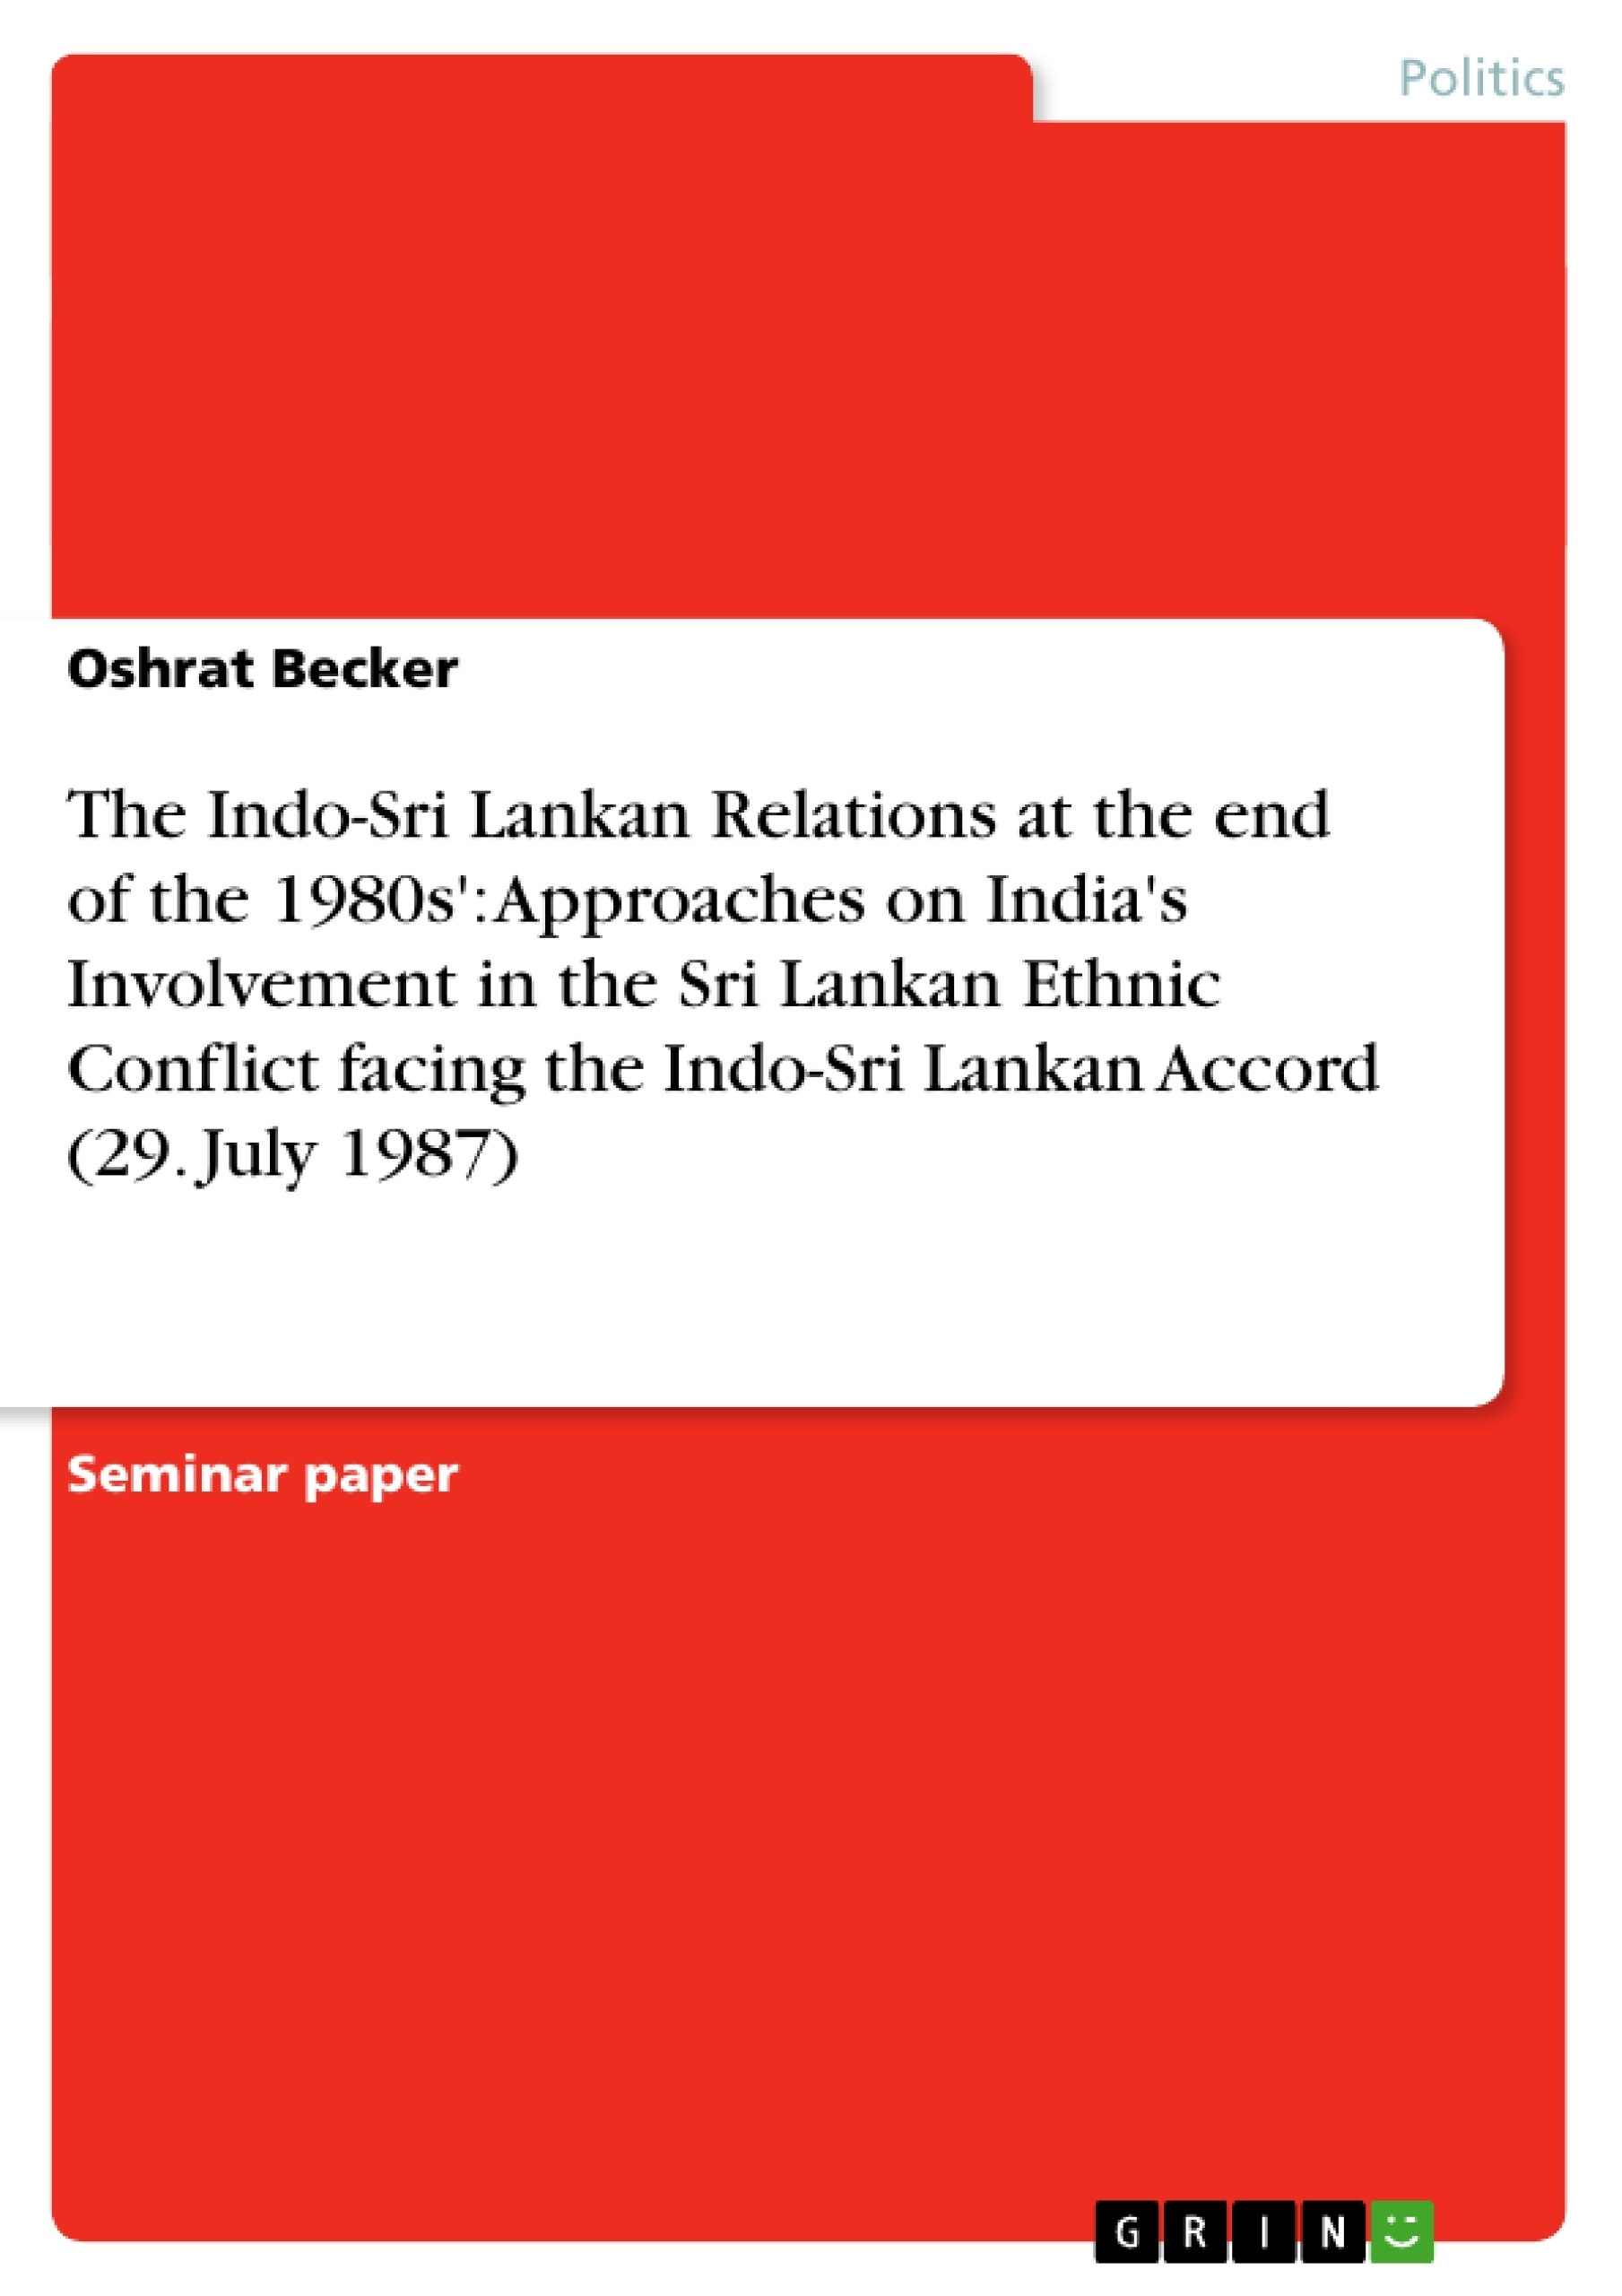 Title: The Indo-Sri Lankan Relations at the end of the 1980s': Approaches on India's Involvement in the Sri Lankan Ethnic Conflict facing the Indo-Sri Lankan Accord (29. July 1987)